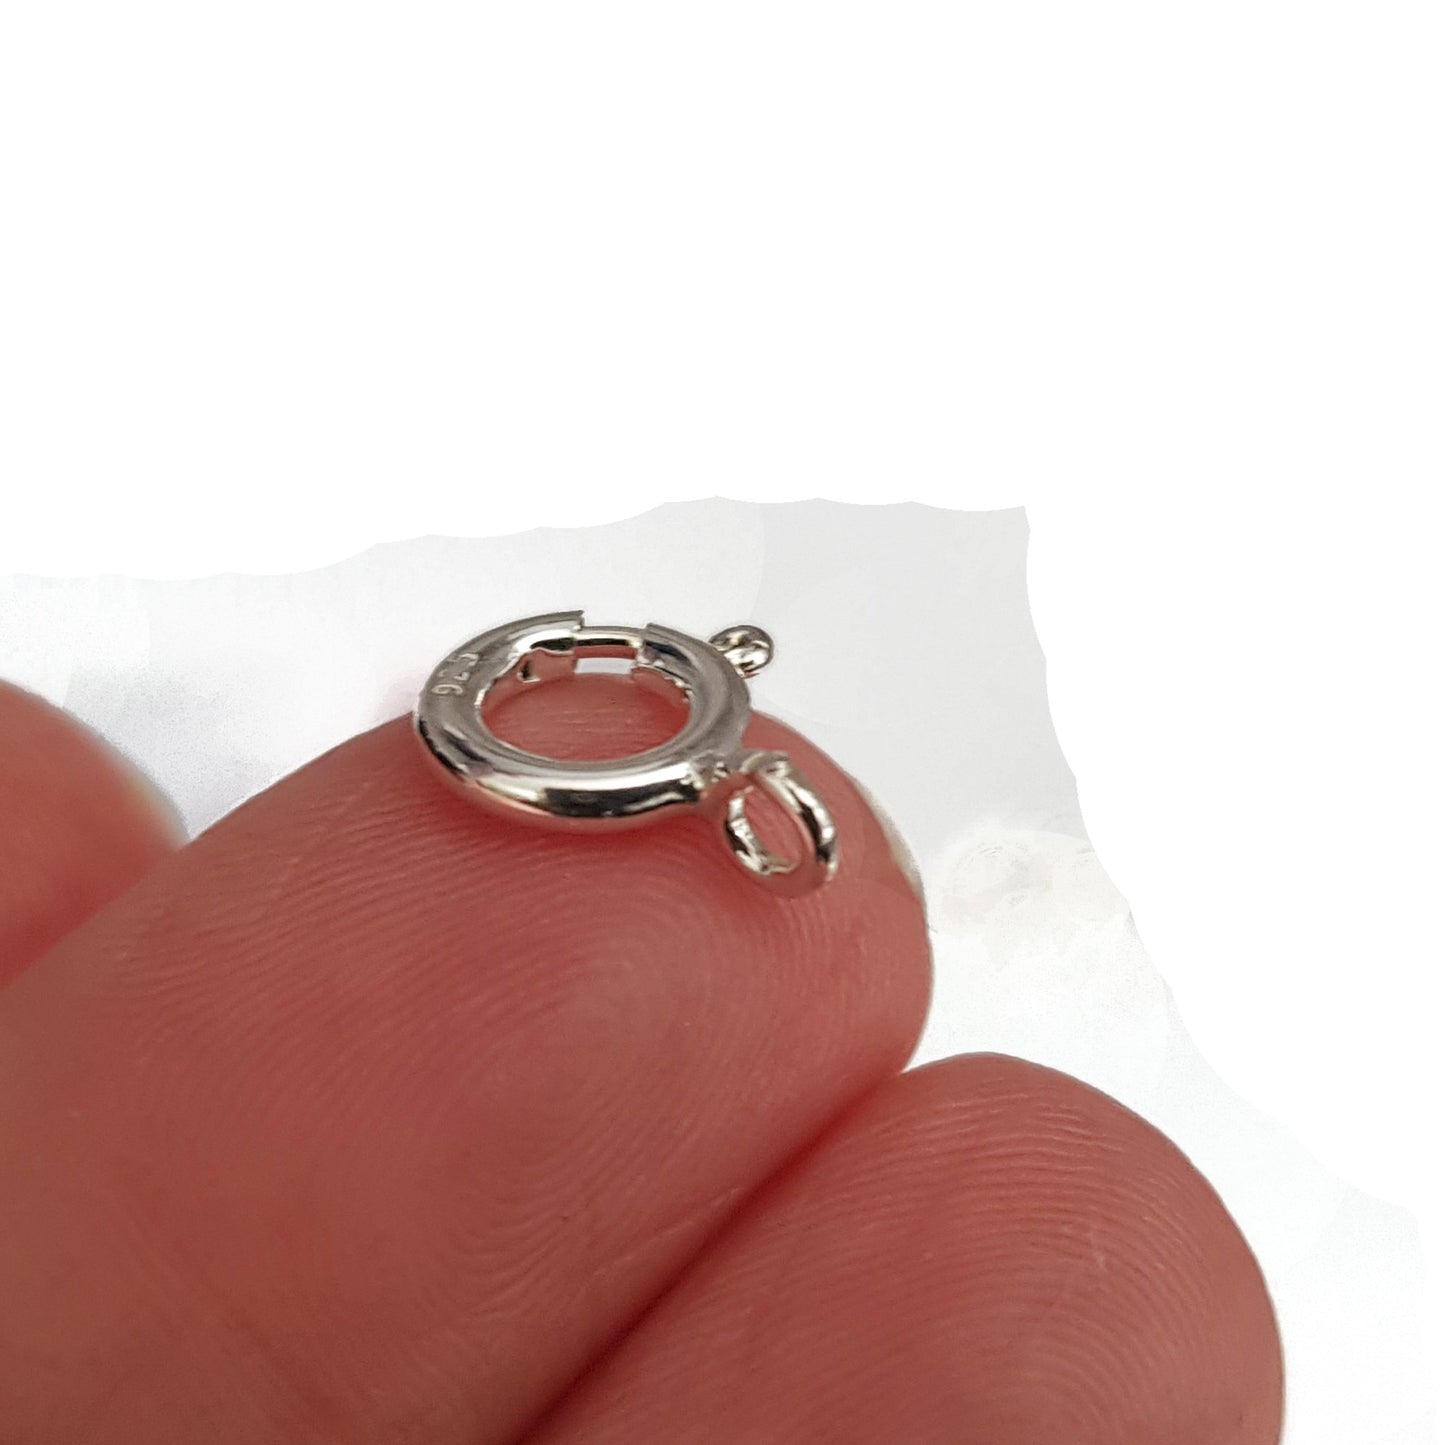 Bolt Ring Clasp 8mm Sterling Silver 3pcs | SS-022BR8 | Jewellery Supply - Kalitheo Jewellery